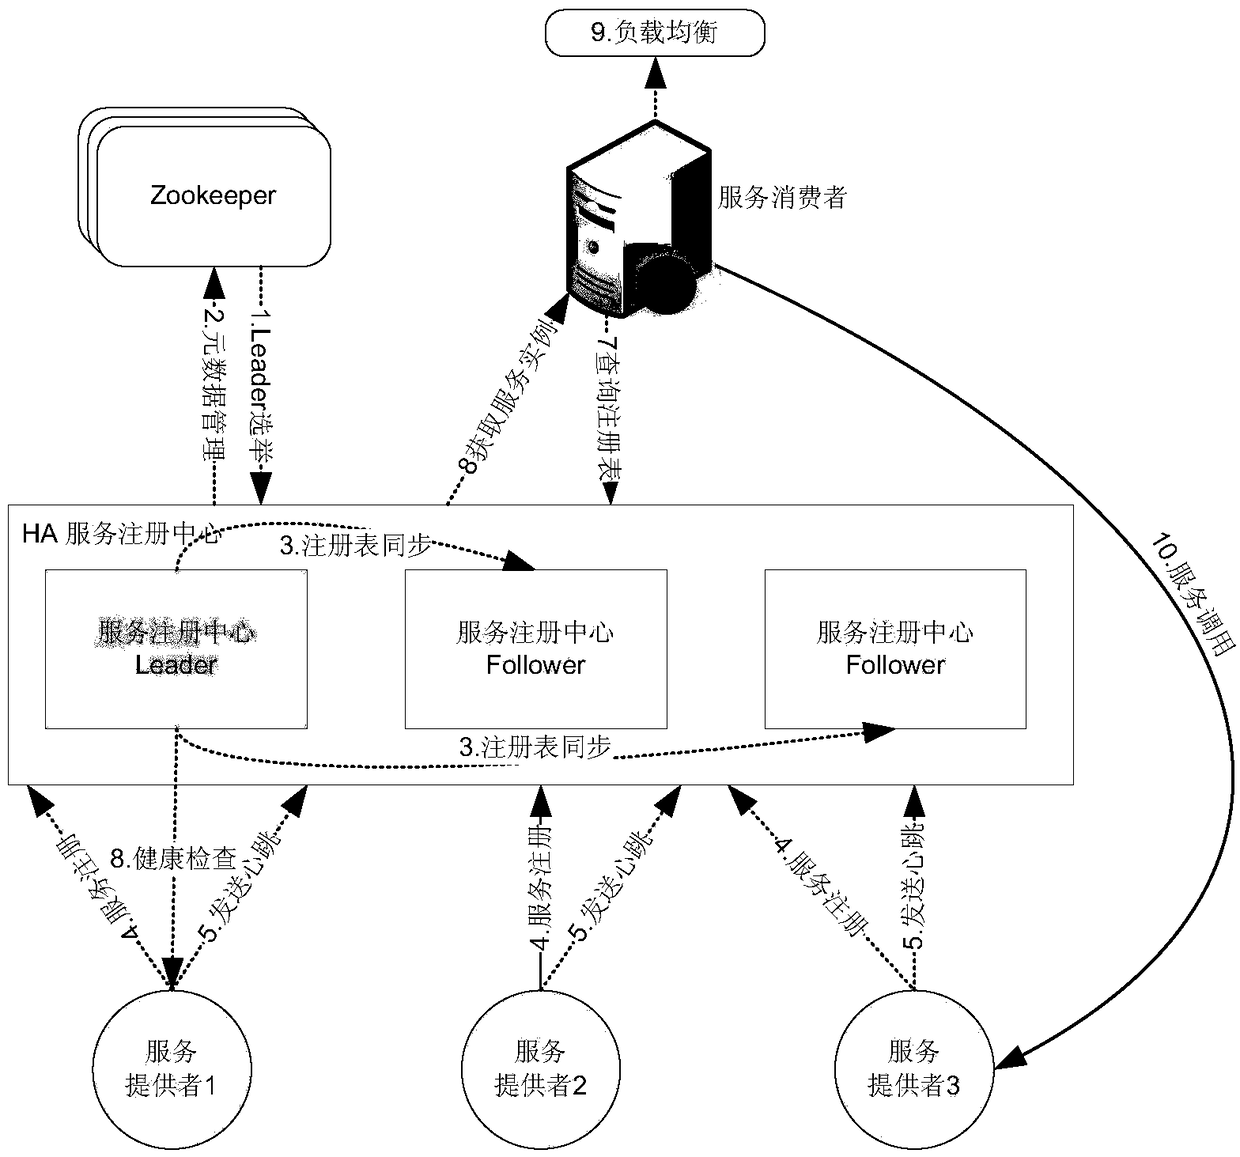 A service discovery and client load balancing method based on a service registration center